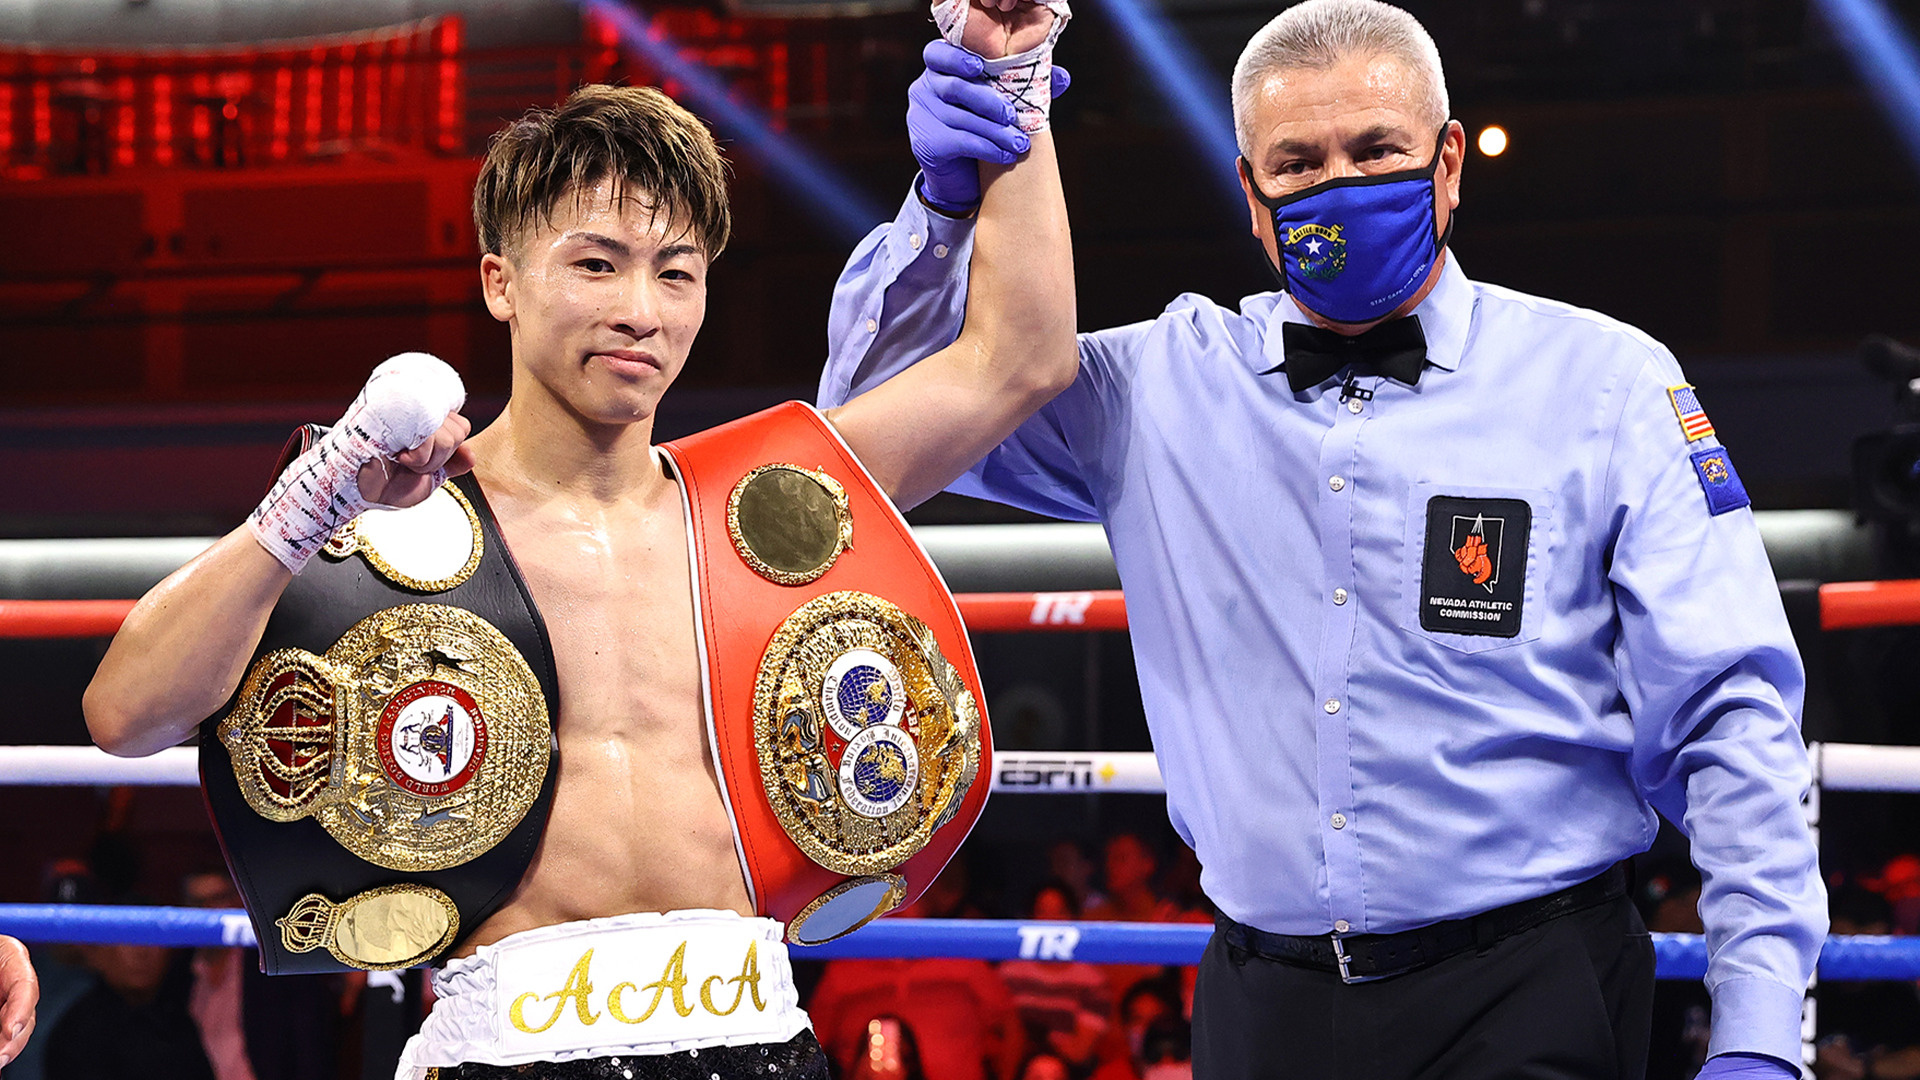 Naoya Inoue, Unstoppable monster, Donaire boxing bout, Two rounds, 1920x1080 Full HD Desktop